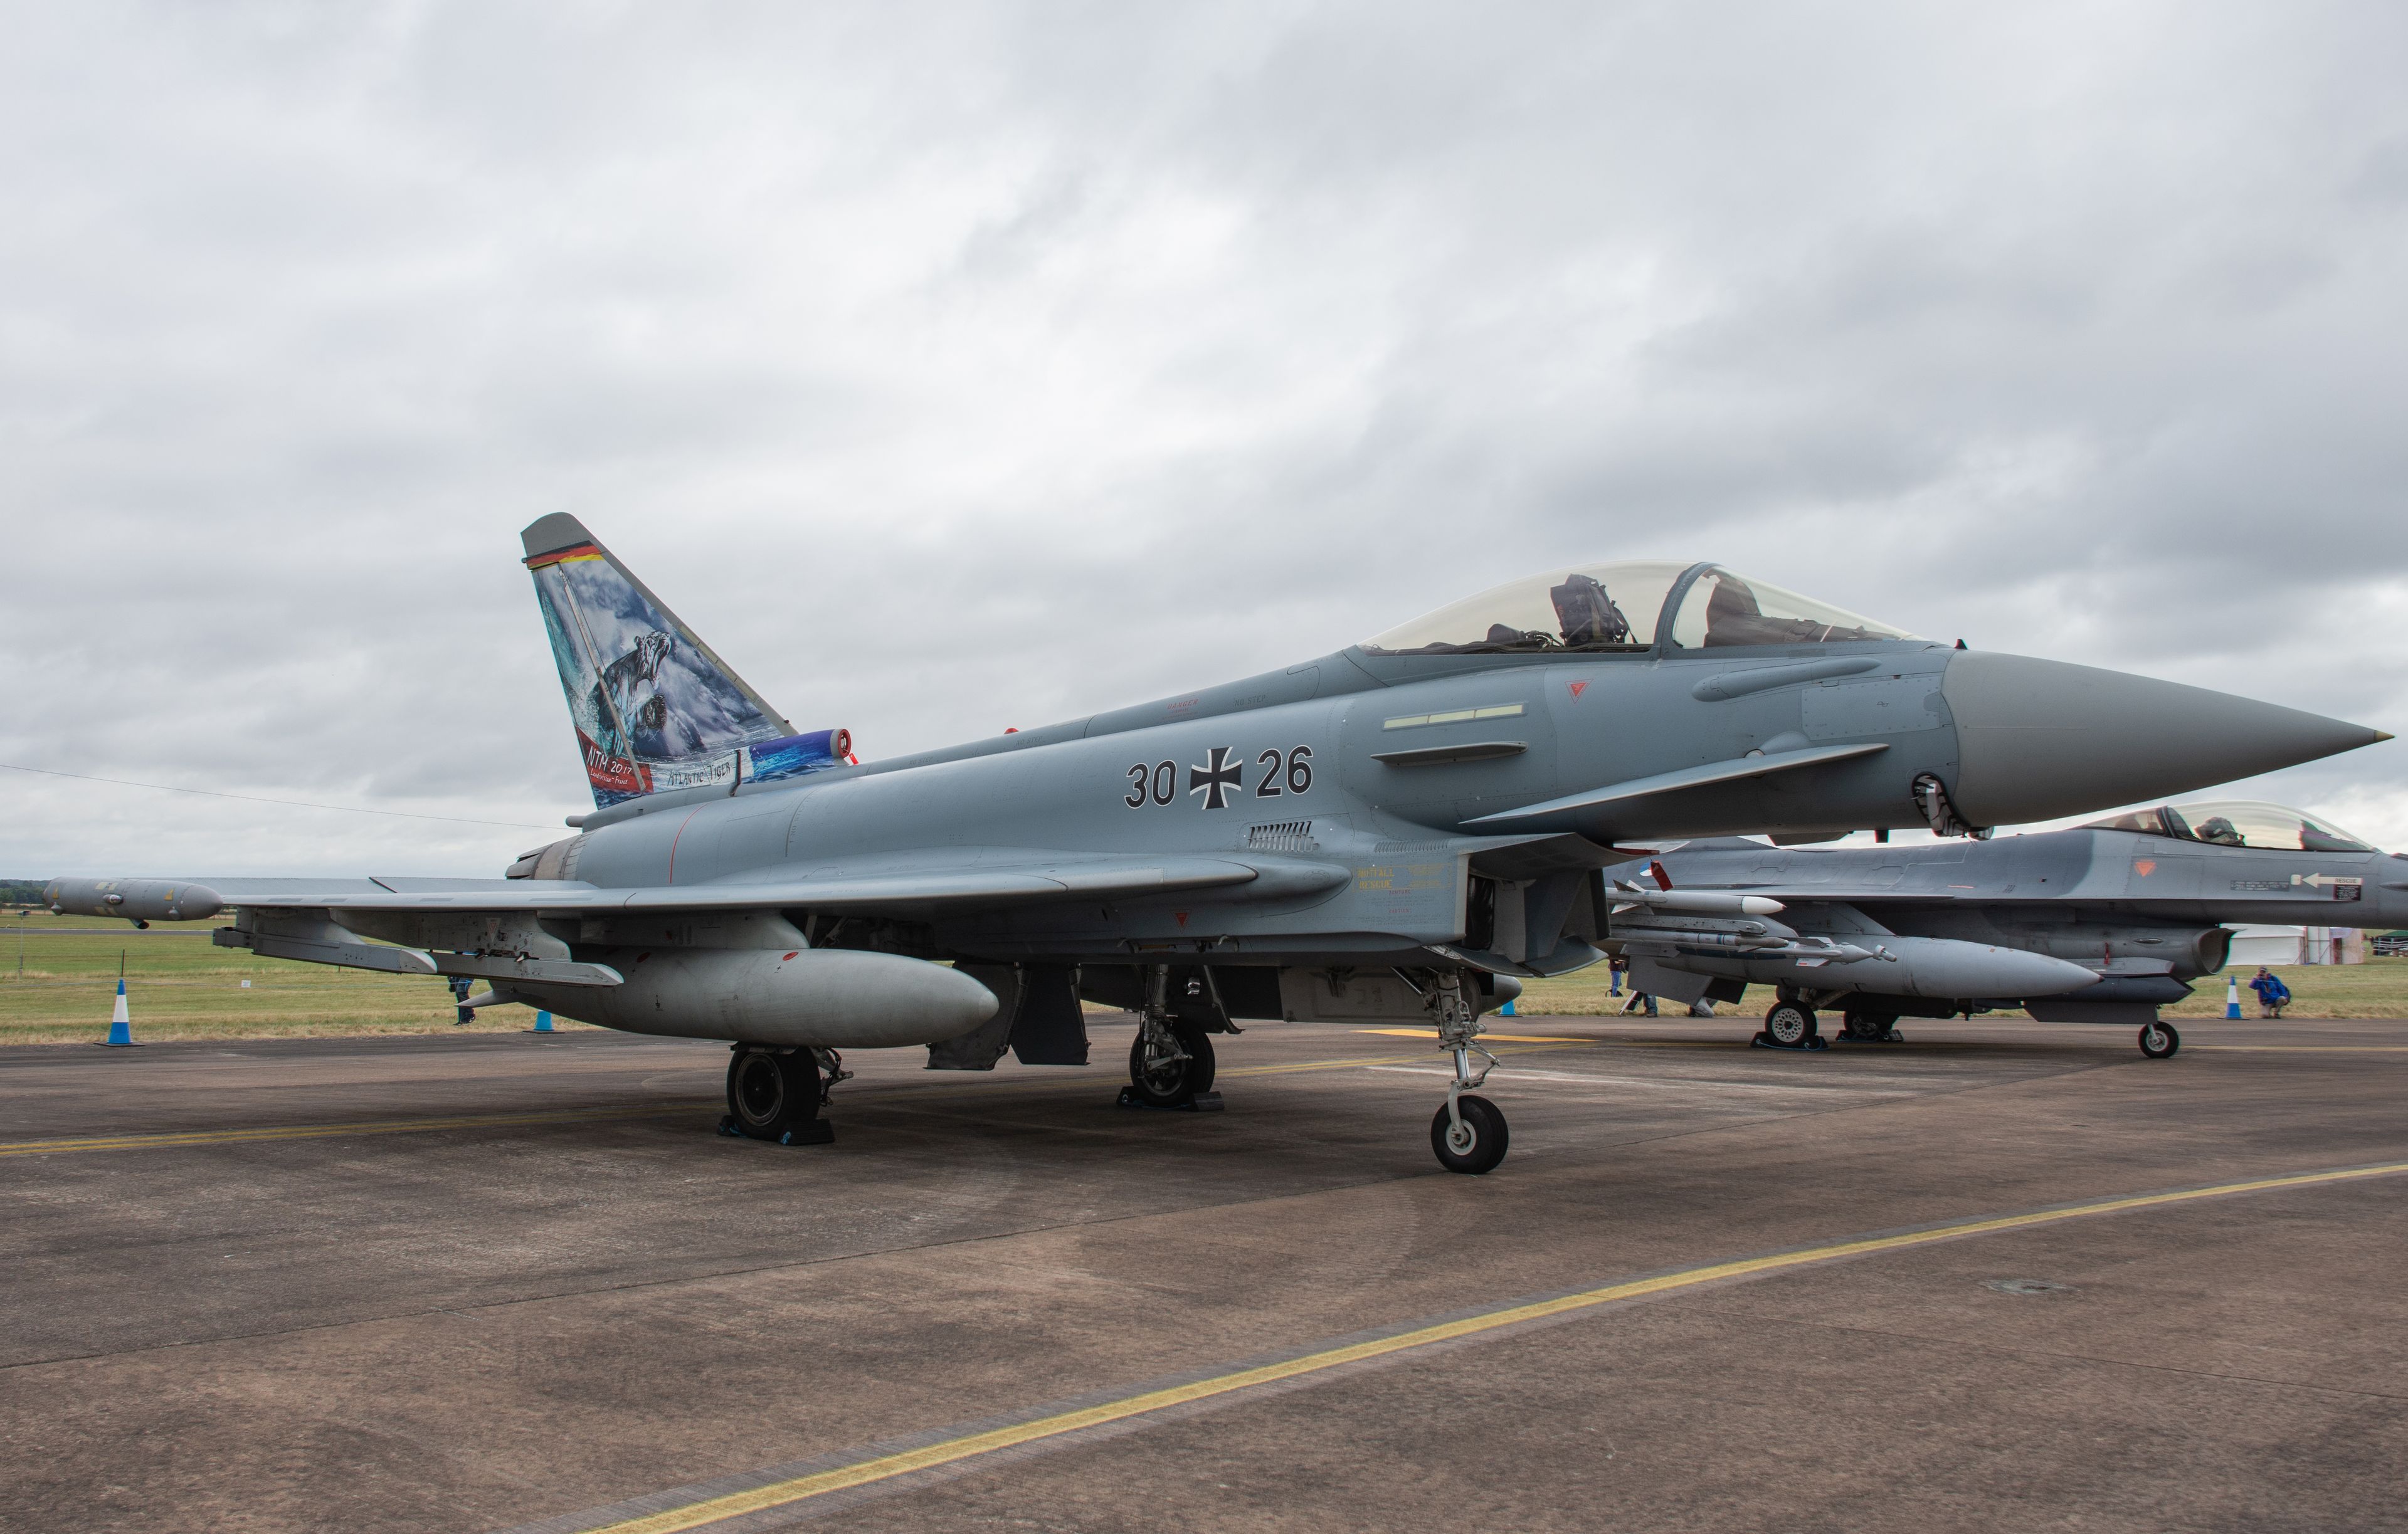 30+26/30+26 German Air Force Eurofighter Typhoon Airframe Information - AVSpotters.com